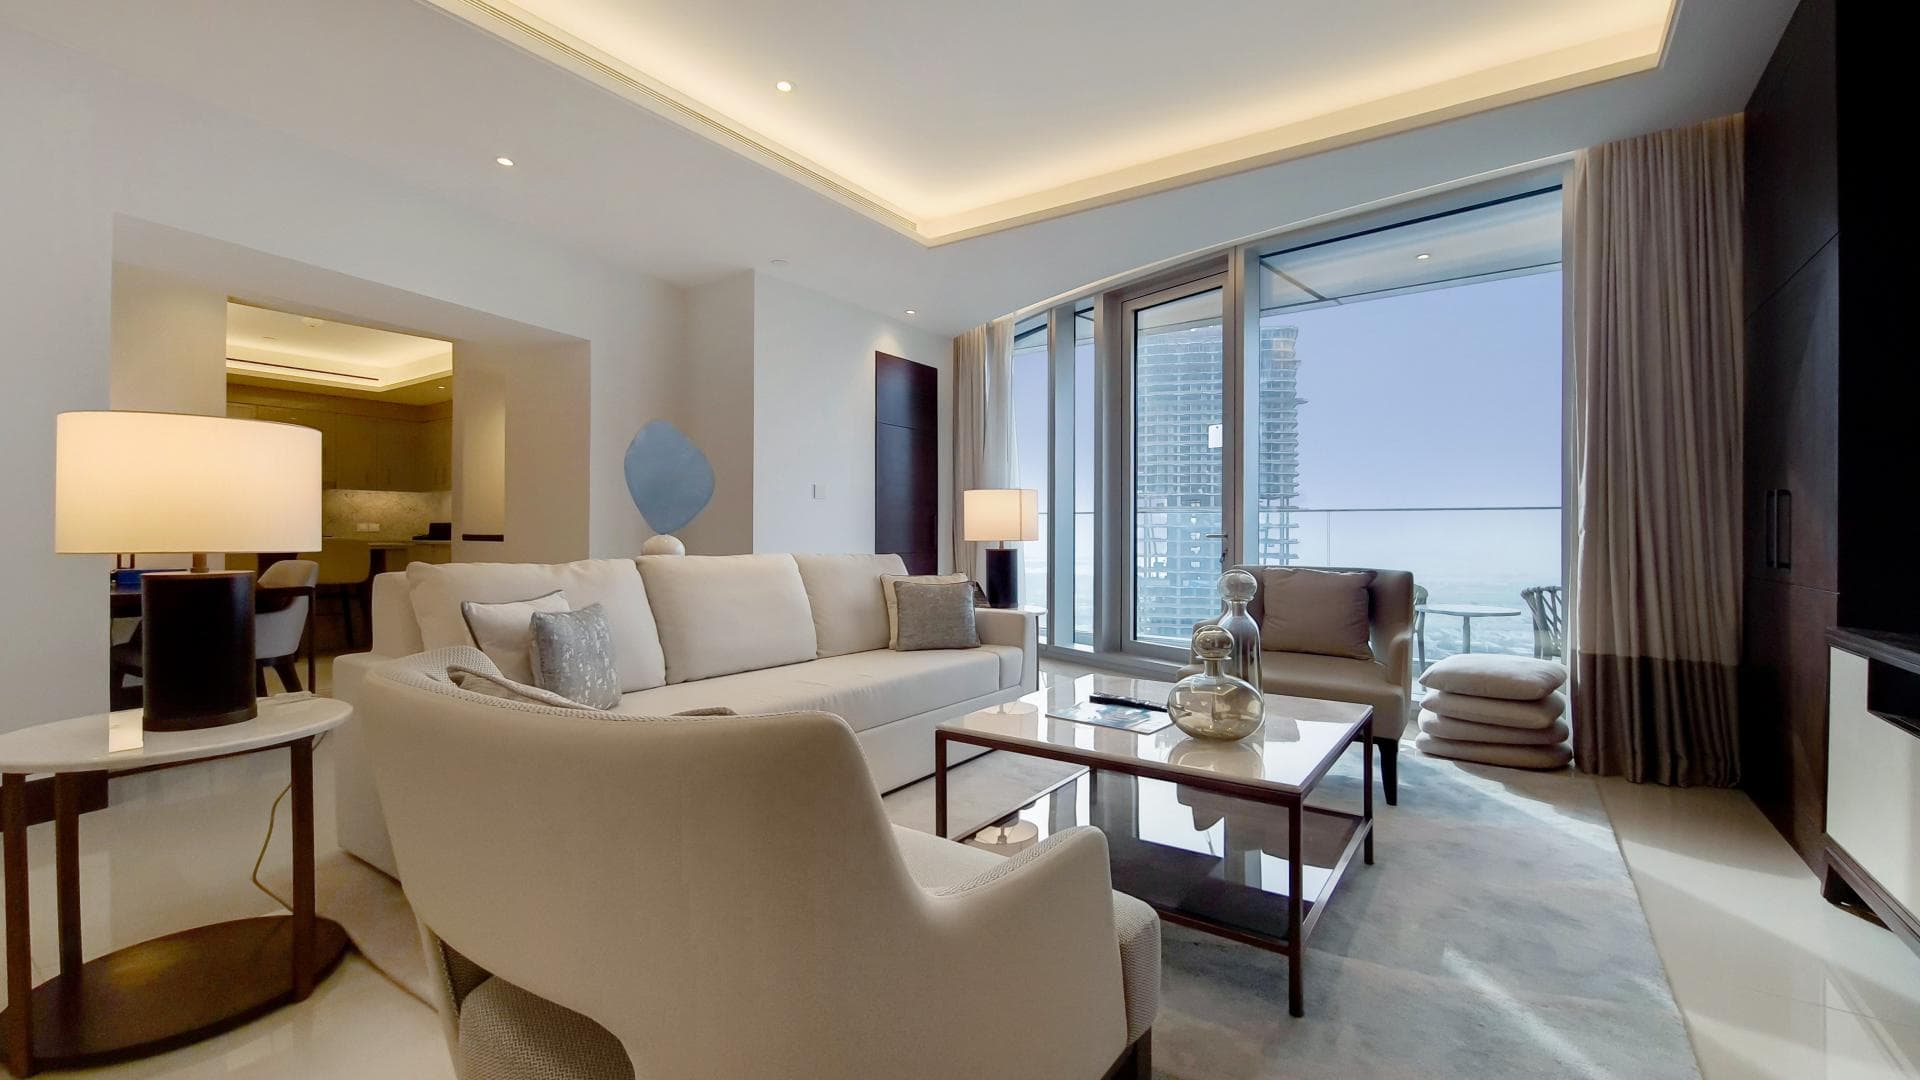 2 Bedroom Apartment For Sale The Address Sky View Towers Lp16402 21b8c42b947f9800.jpg